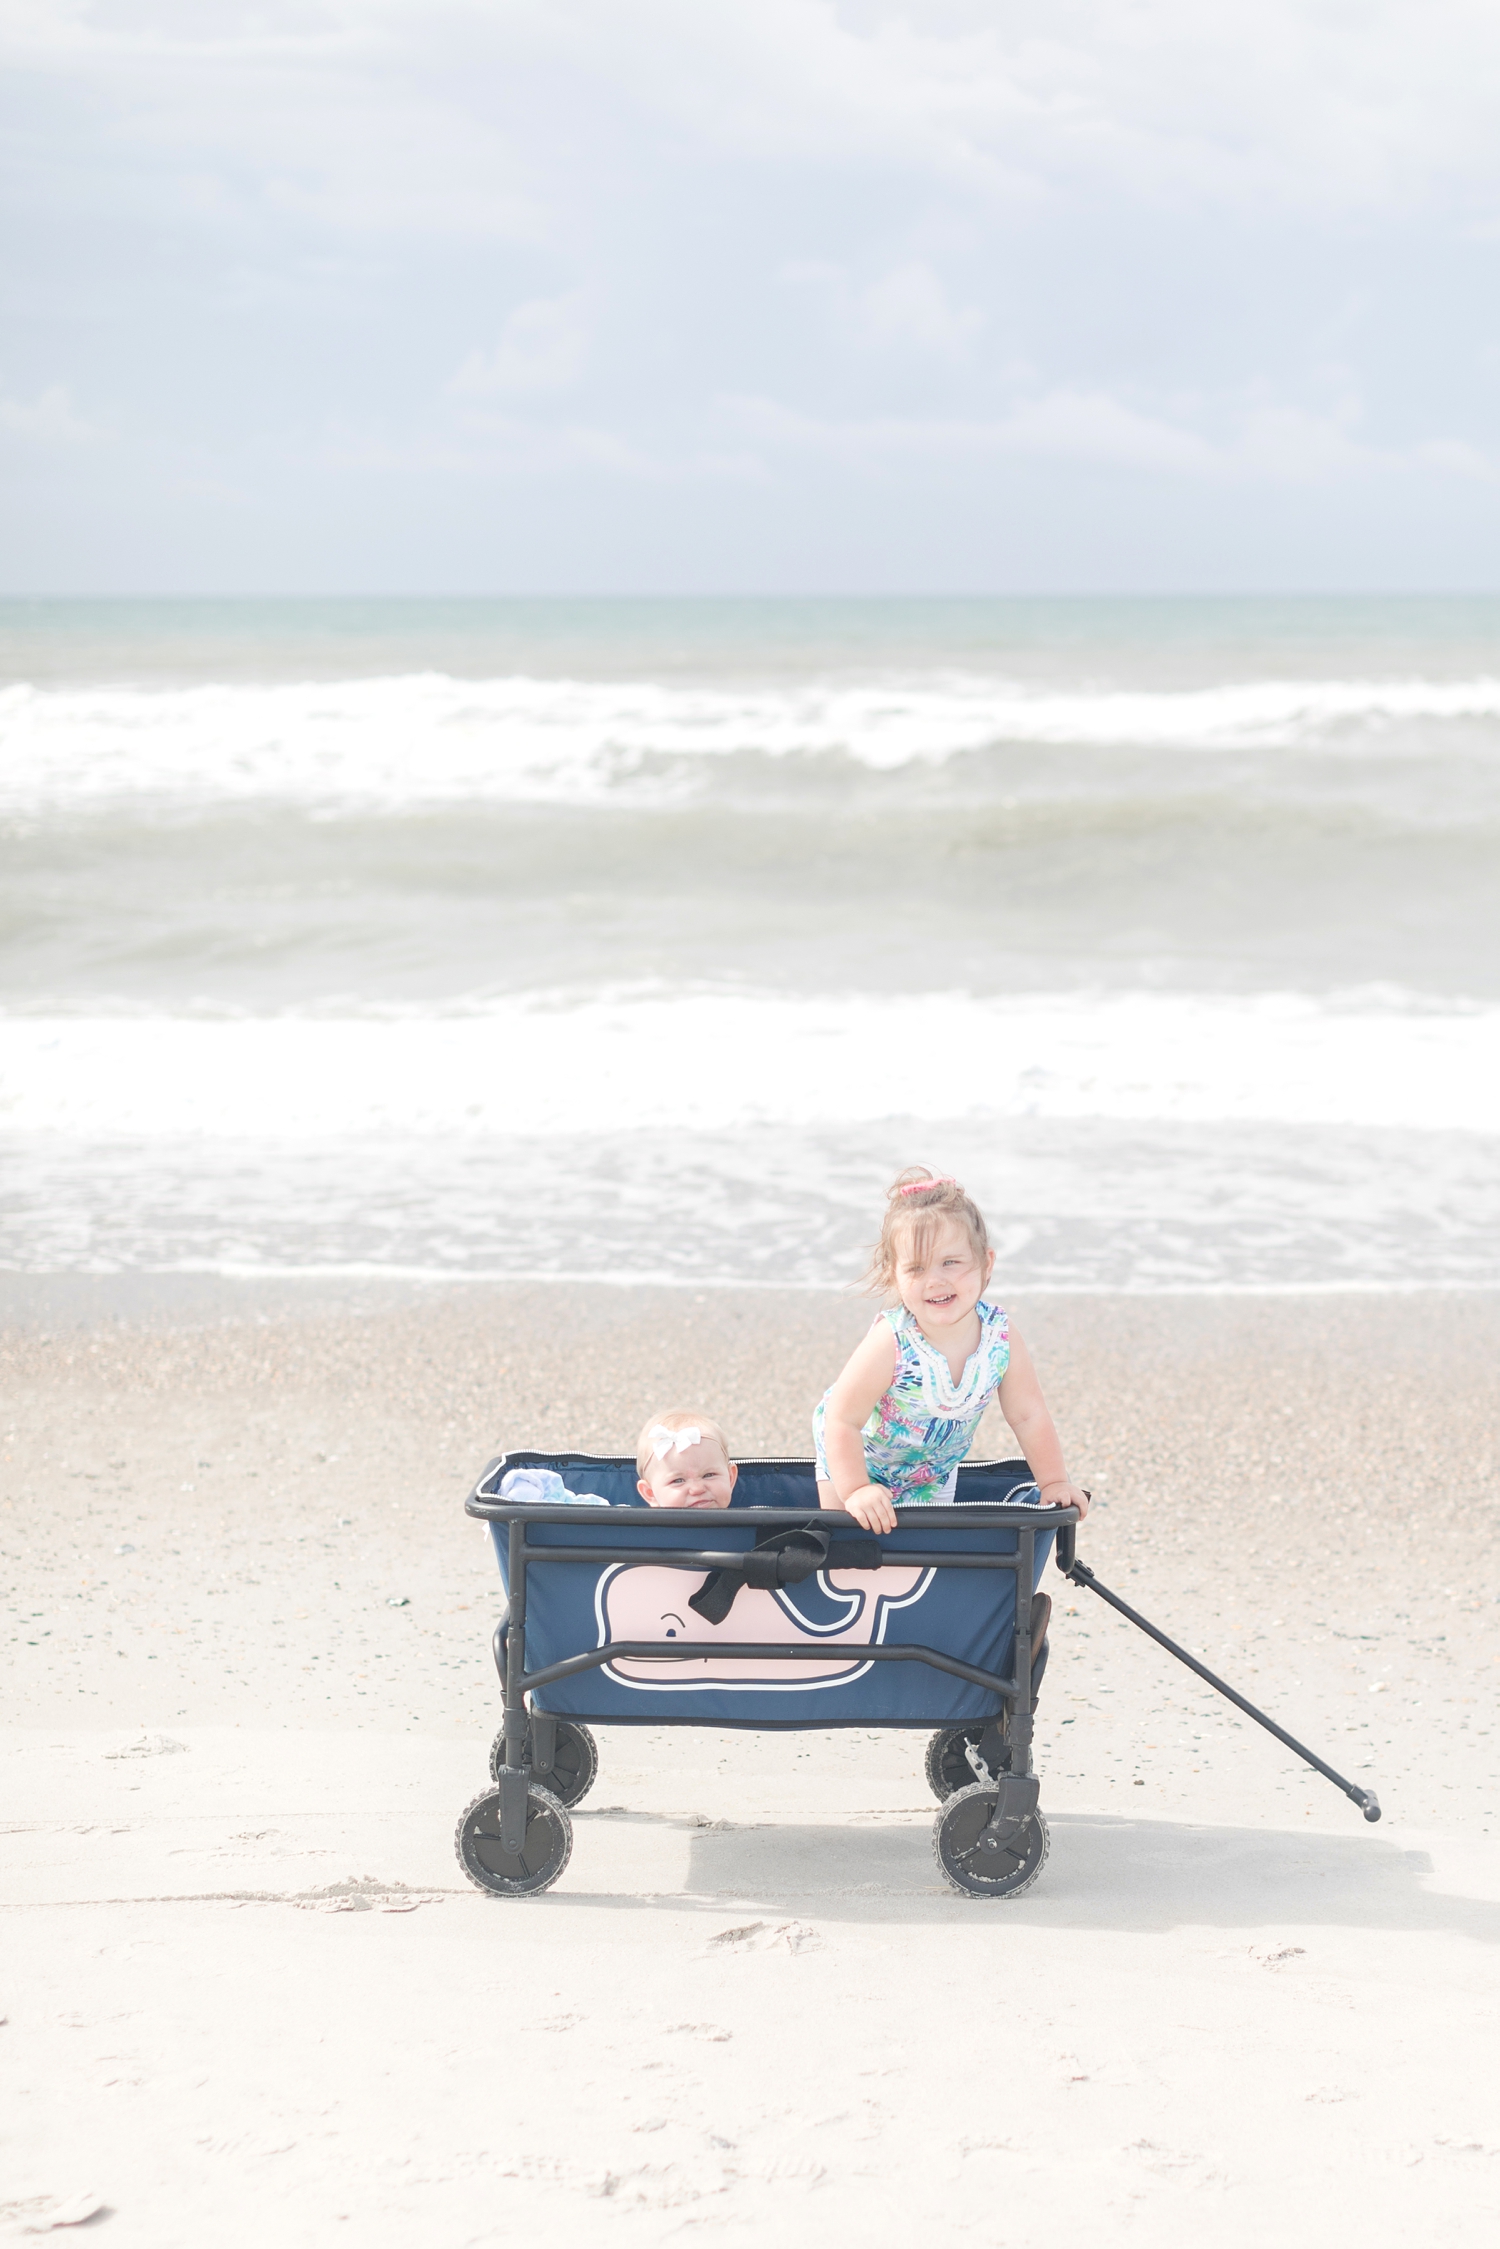  We bought a beach cart this year and this was the other amazing and necessary piece that we used everyday! It was nice because the kids can ride in it or you can put everything in there and not have to carry it all.  